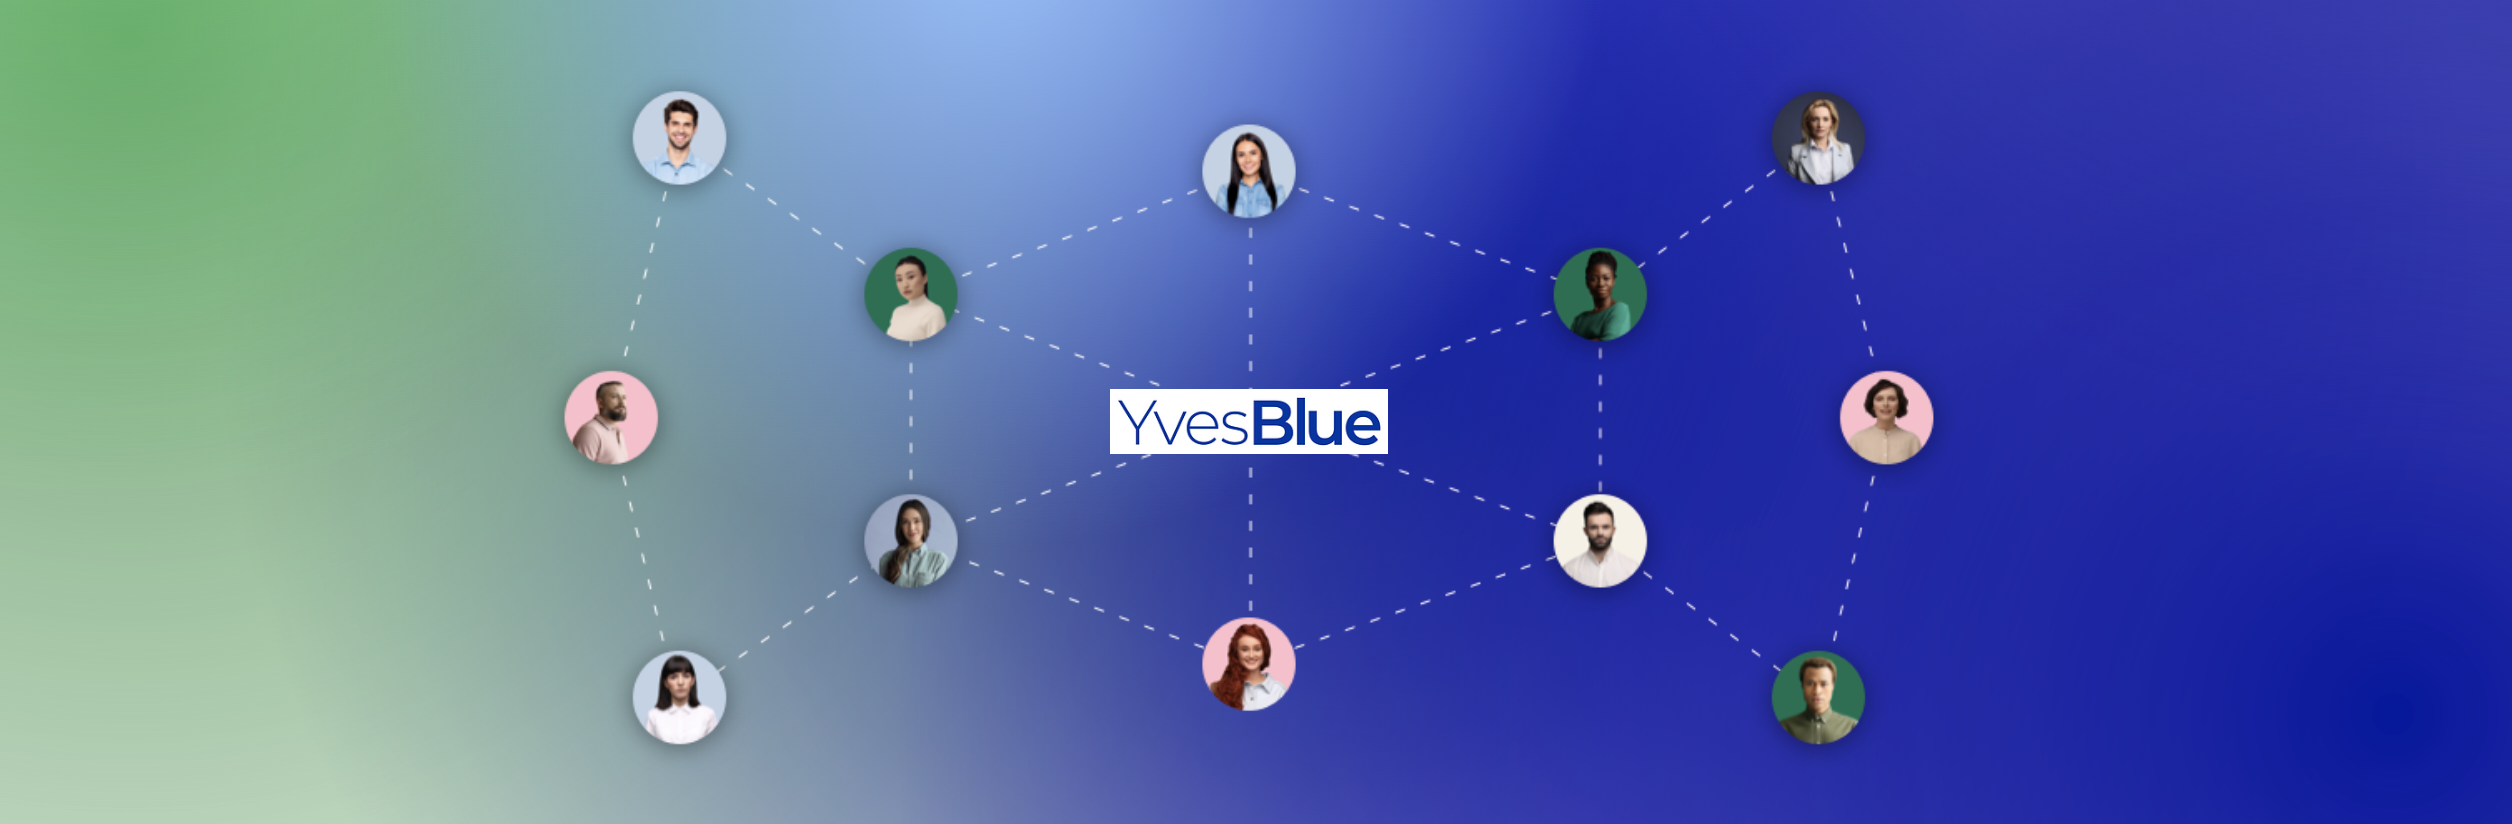 YvesBlue Team and Clients